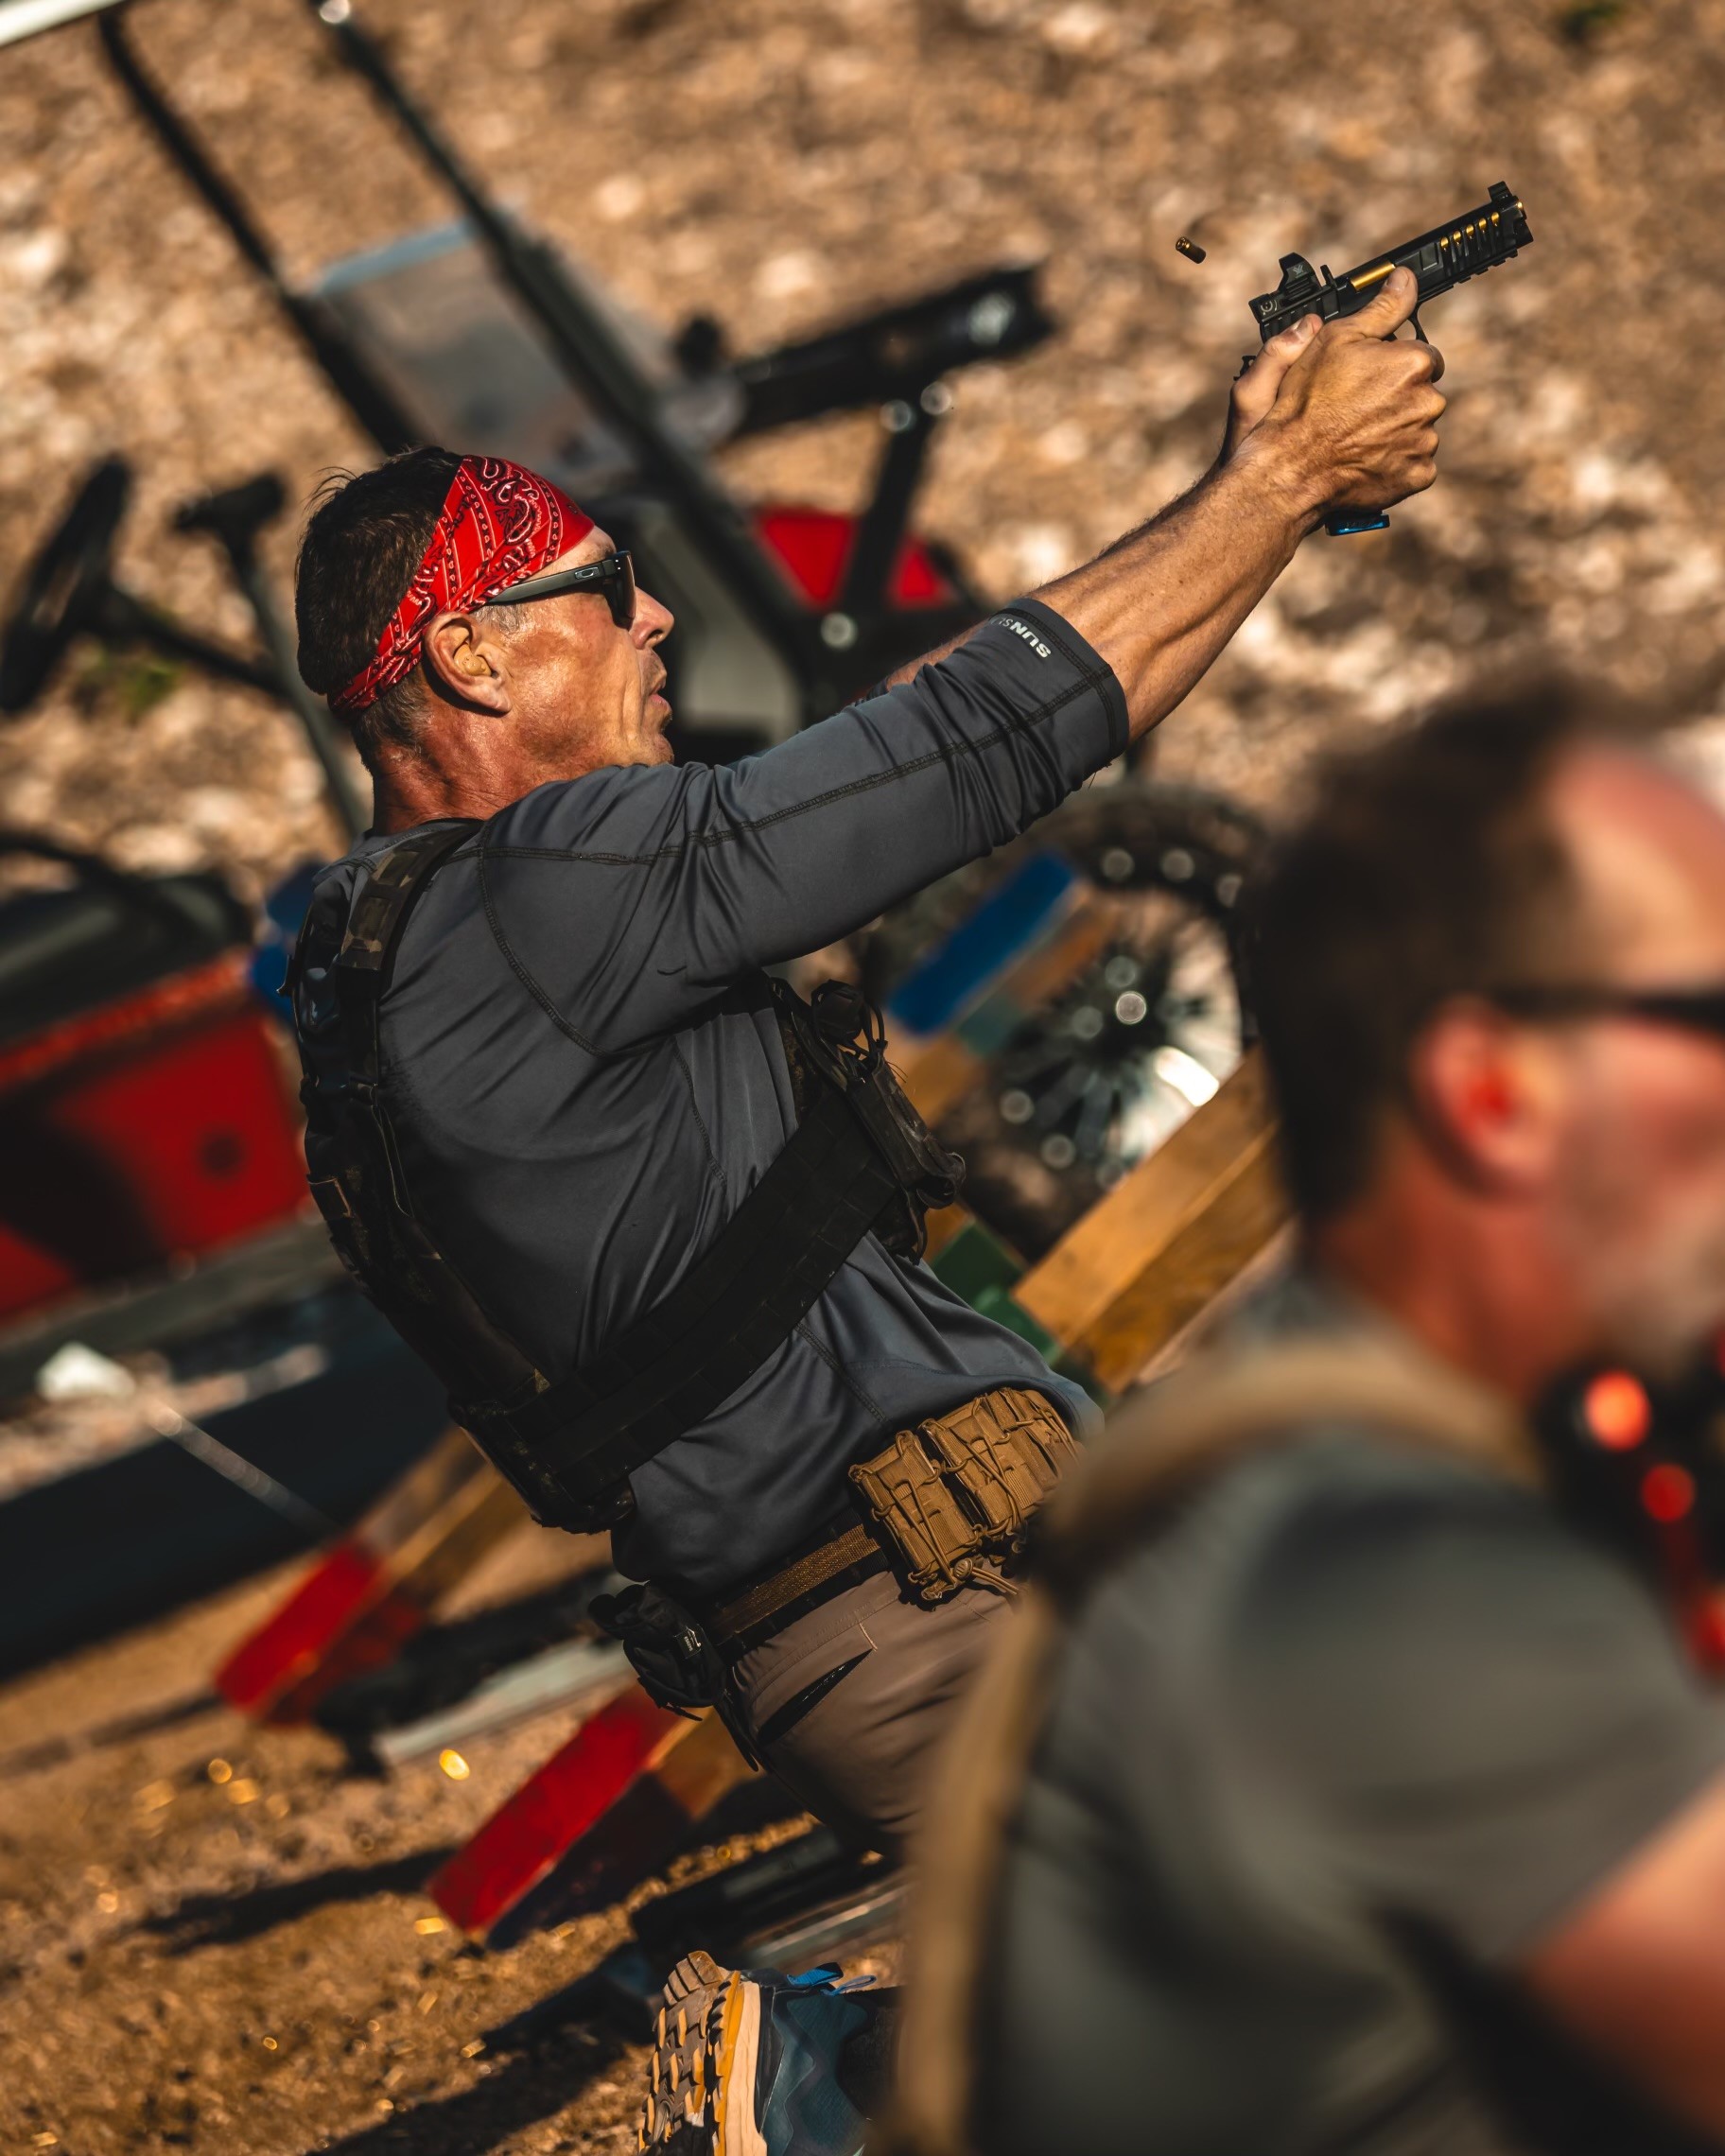 Sgt. Mouret competes in The Tactical Games National Championship in Florence, TX